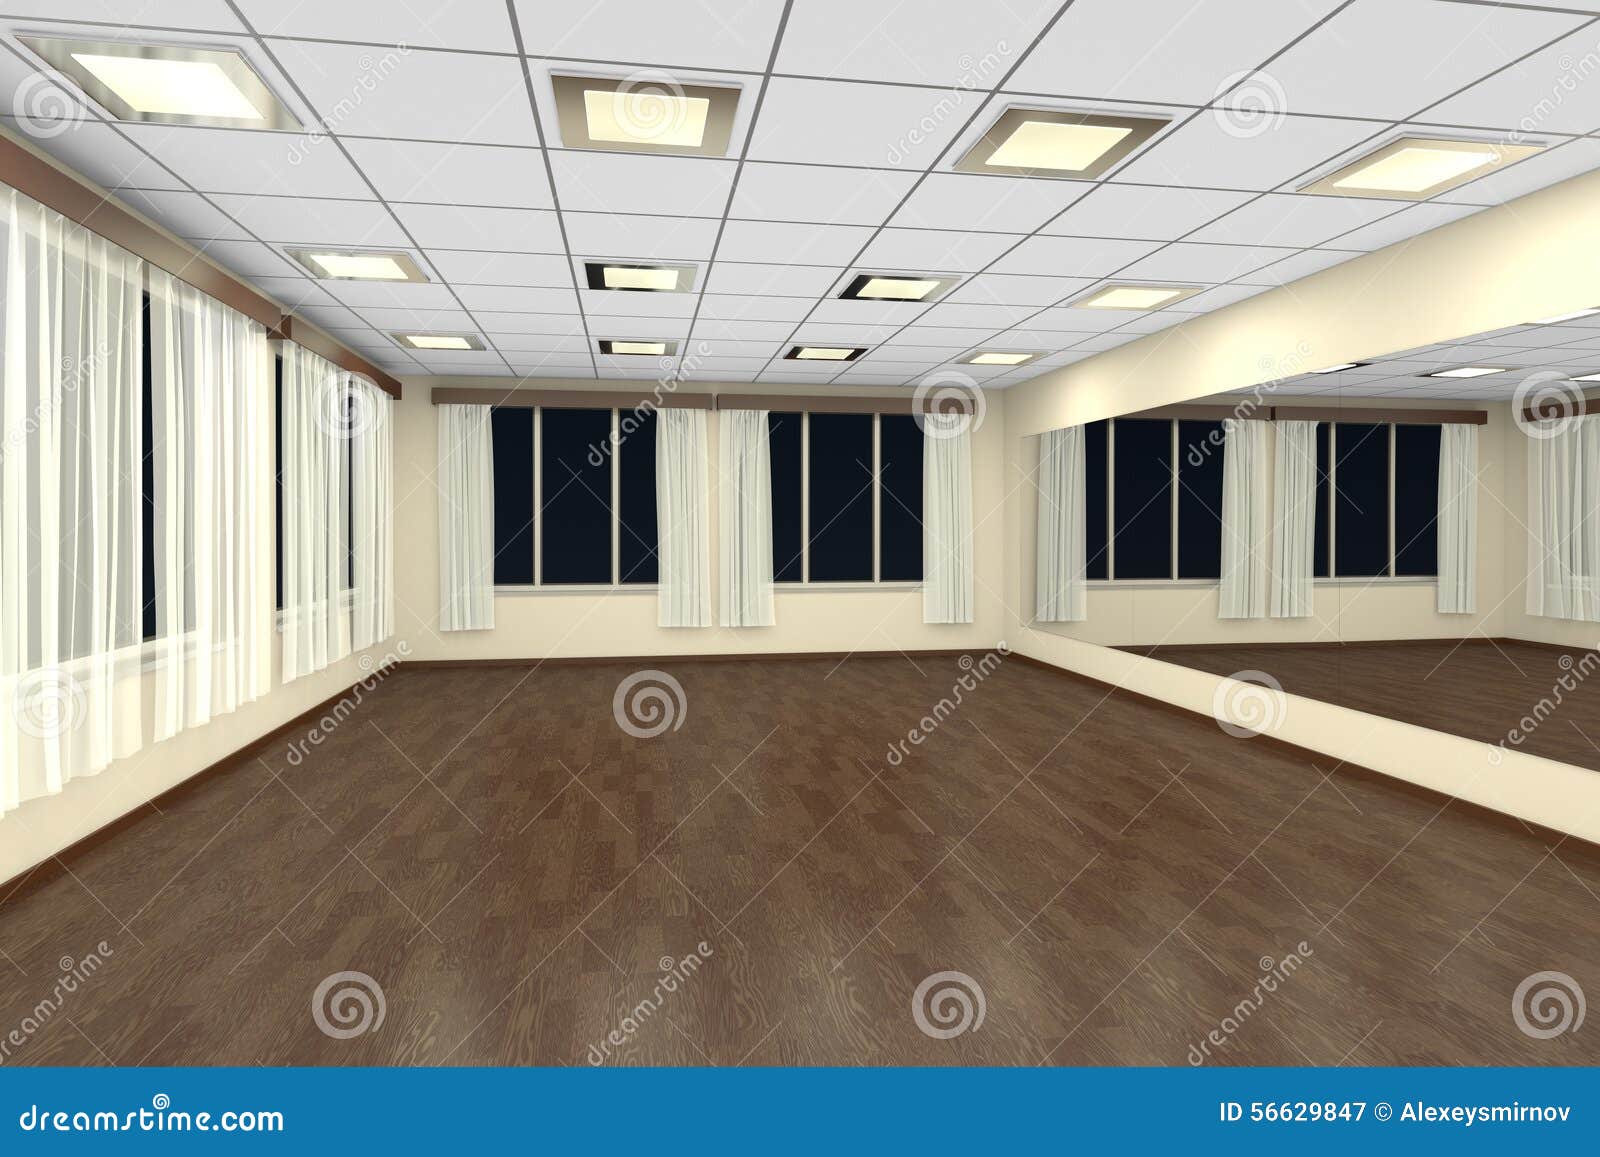 Empty Training Dance Hall At Night With Yellow Walls And Dark